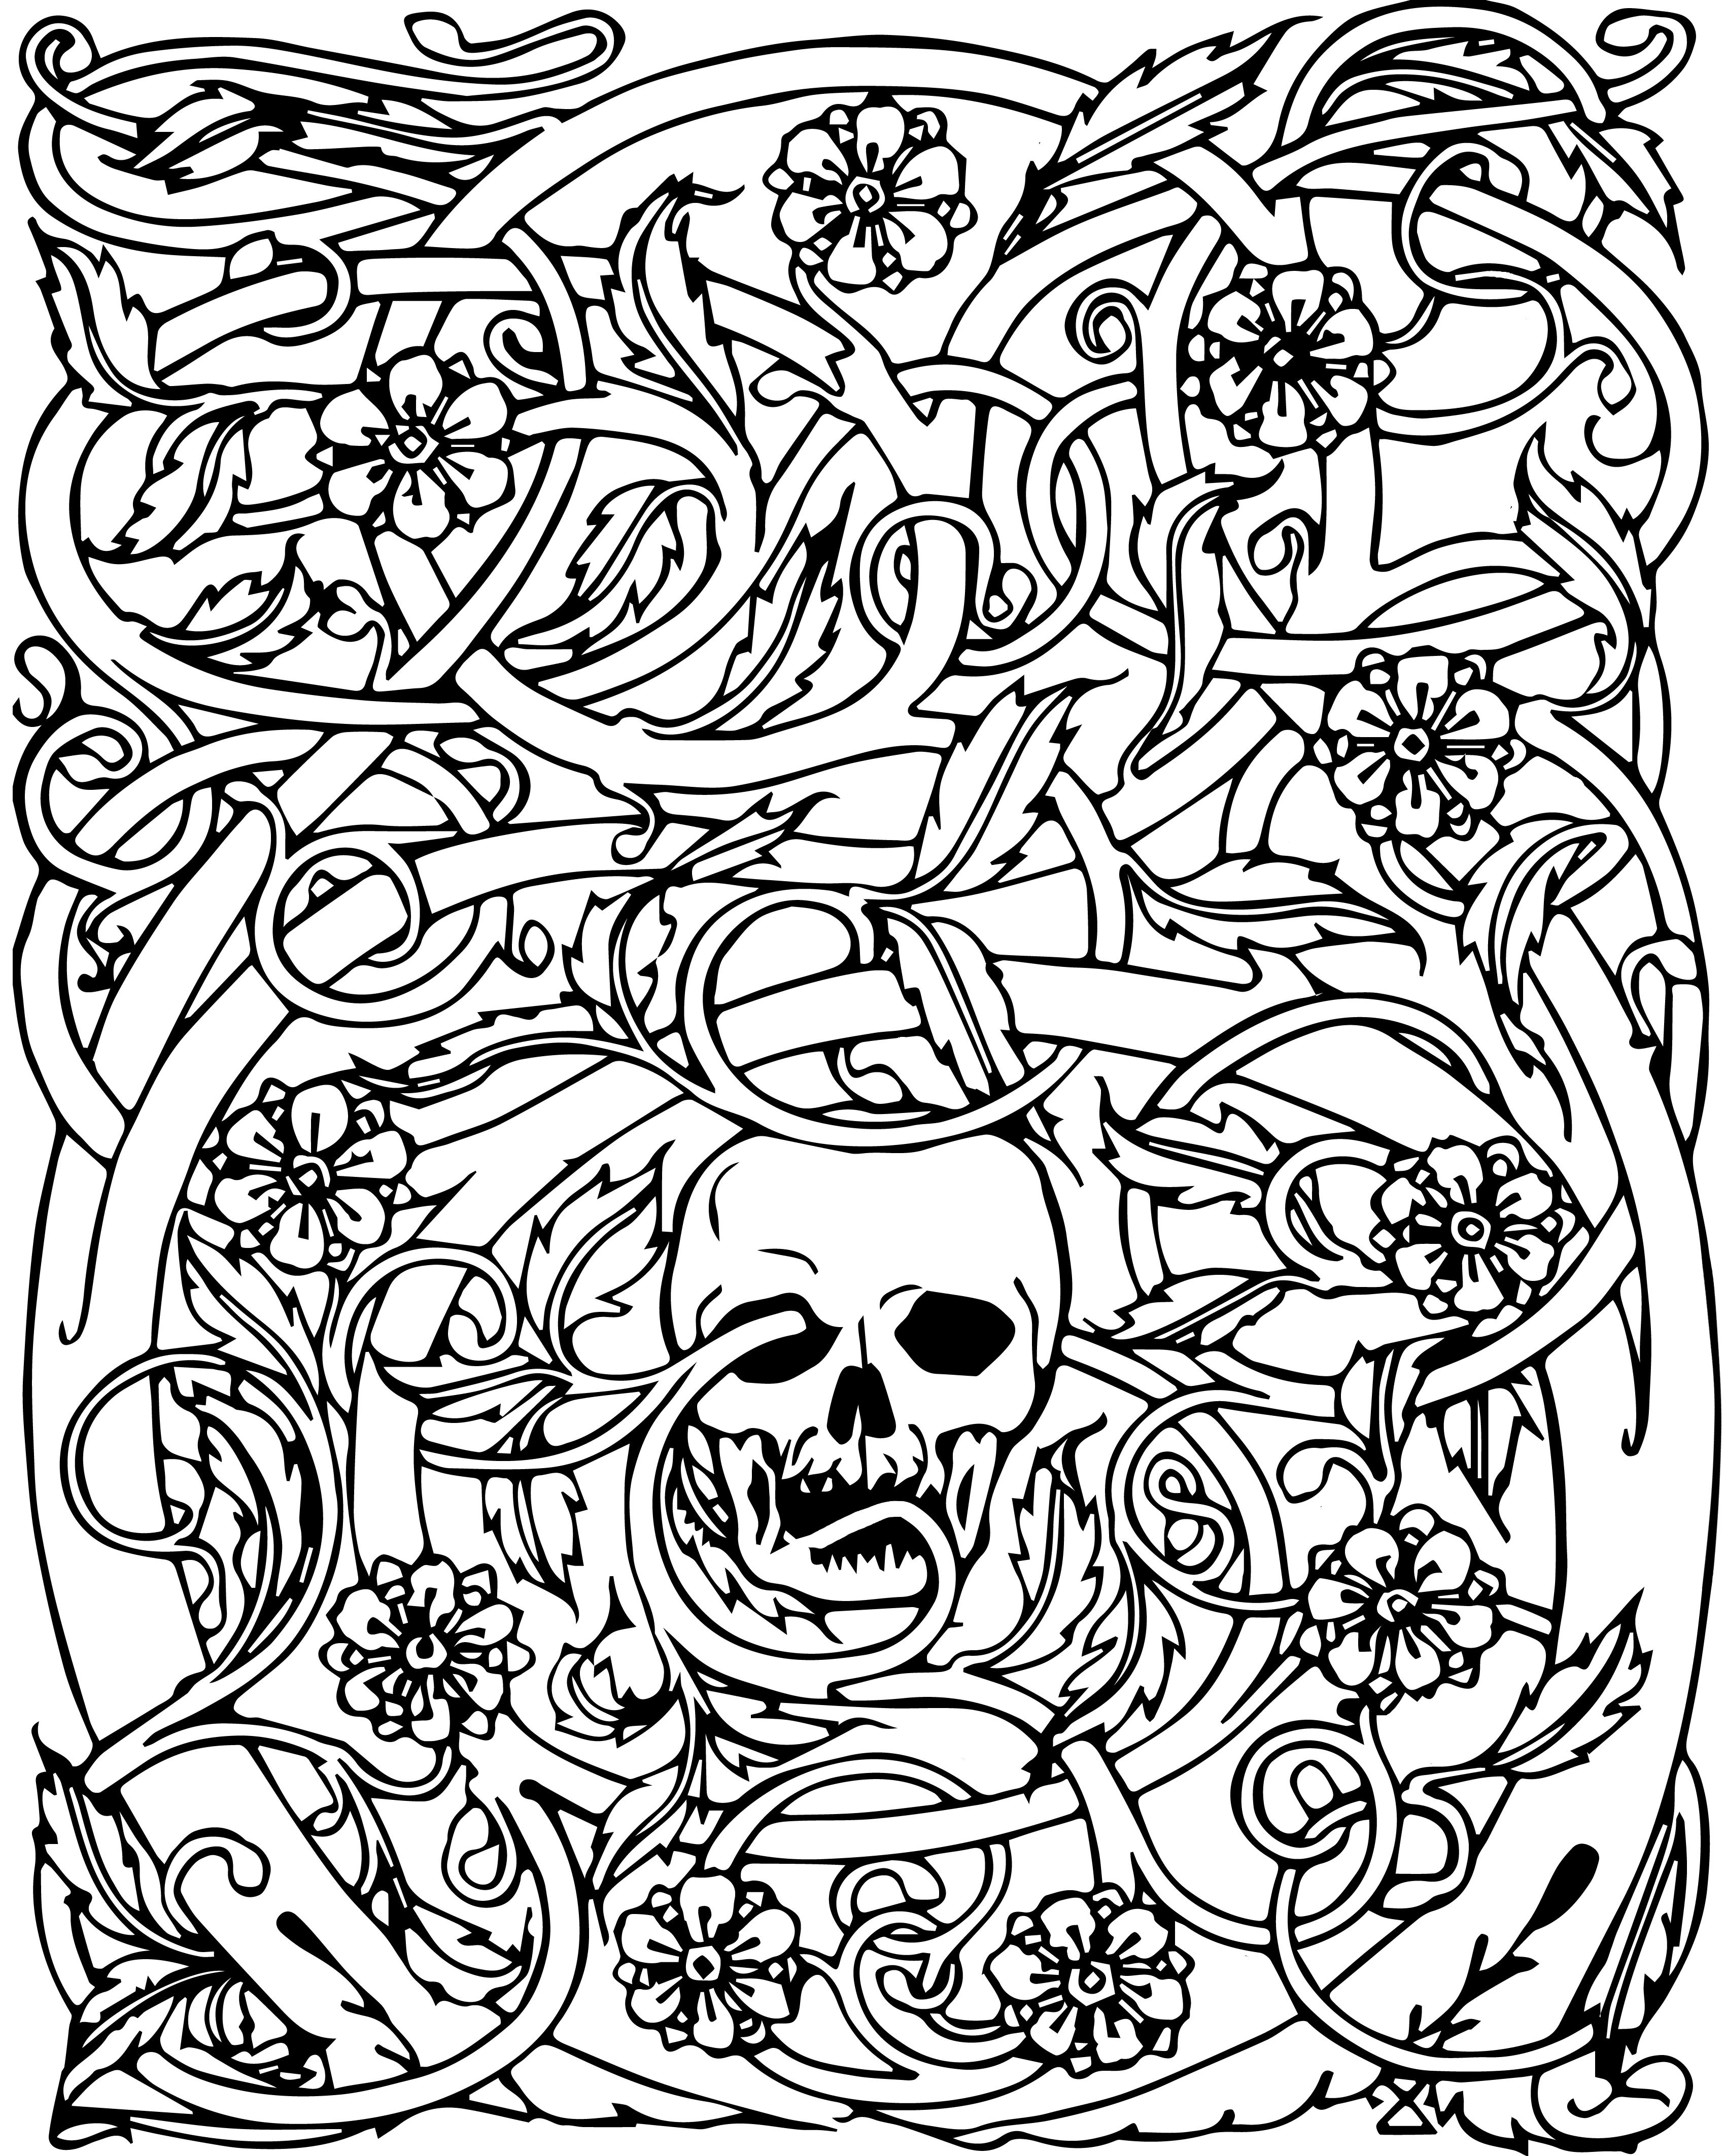 Download Abstract For Adults Coloring Pages - Coloring Home